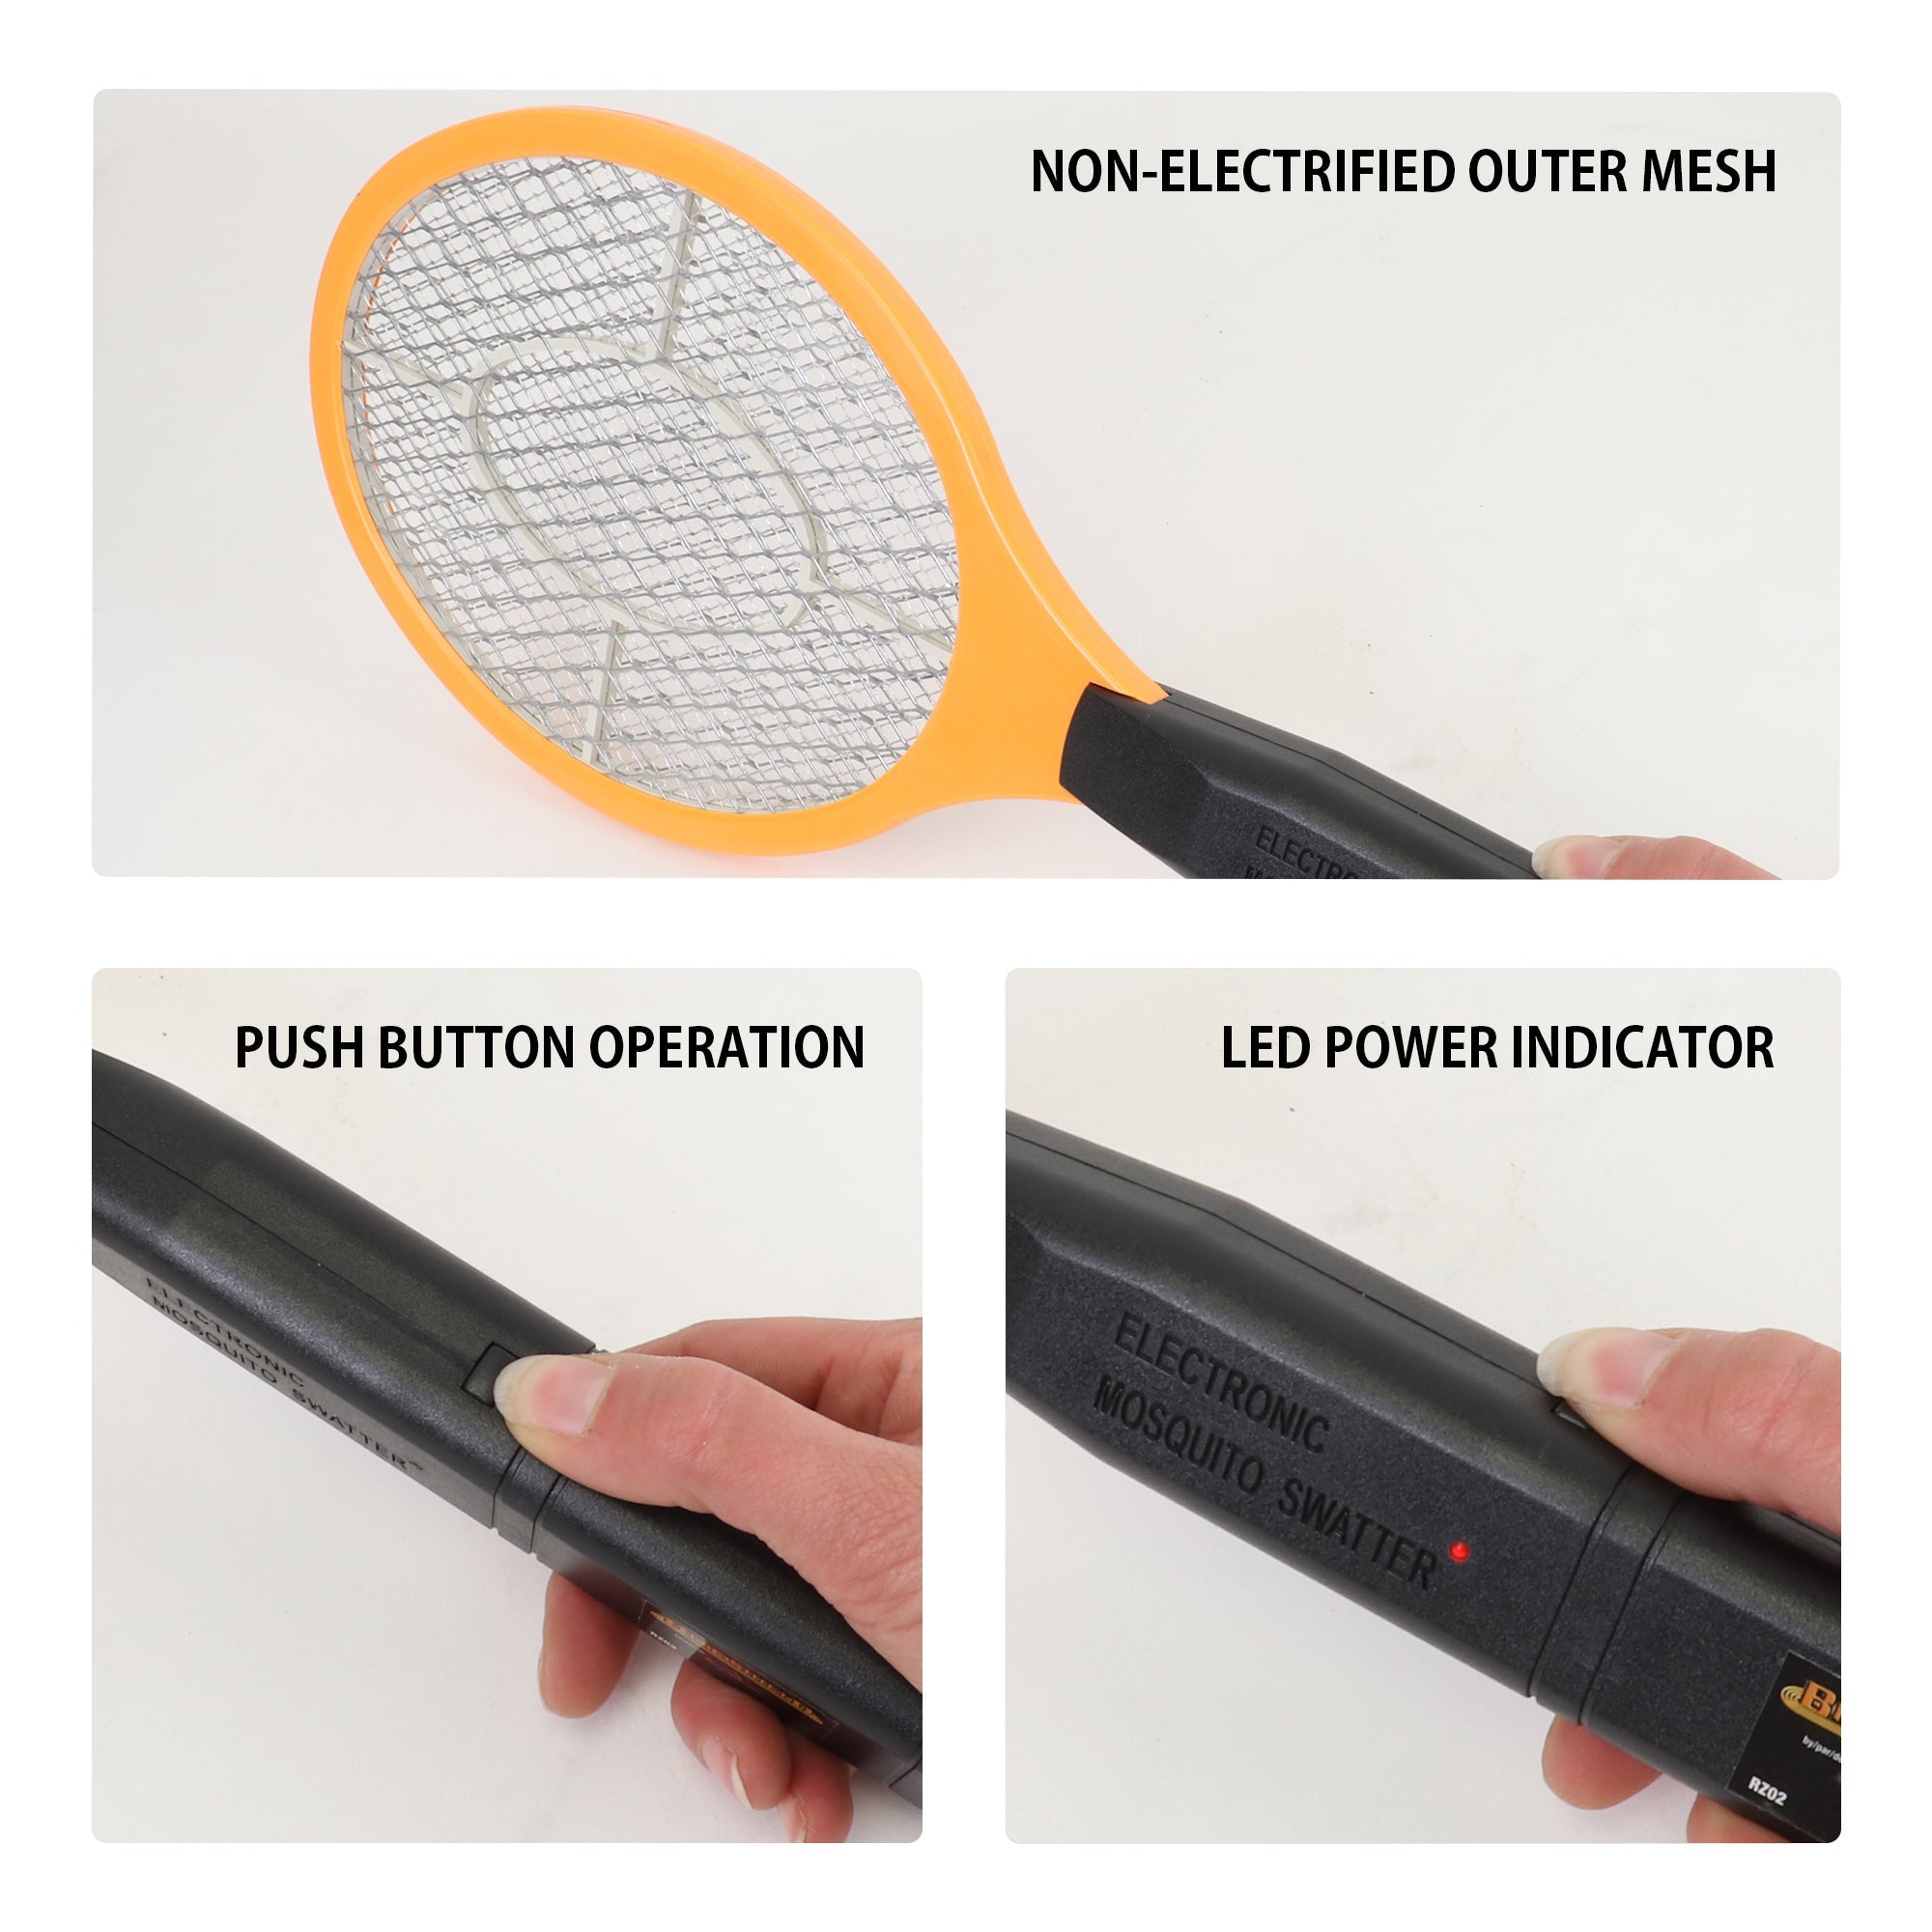 Three closeup images show parts of the Bite Shield racket zapper electronic insect killer, labeled: Non-electrified outer mesh; Push button operation; LED power indicator